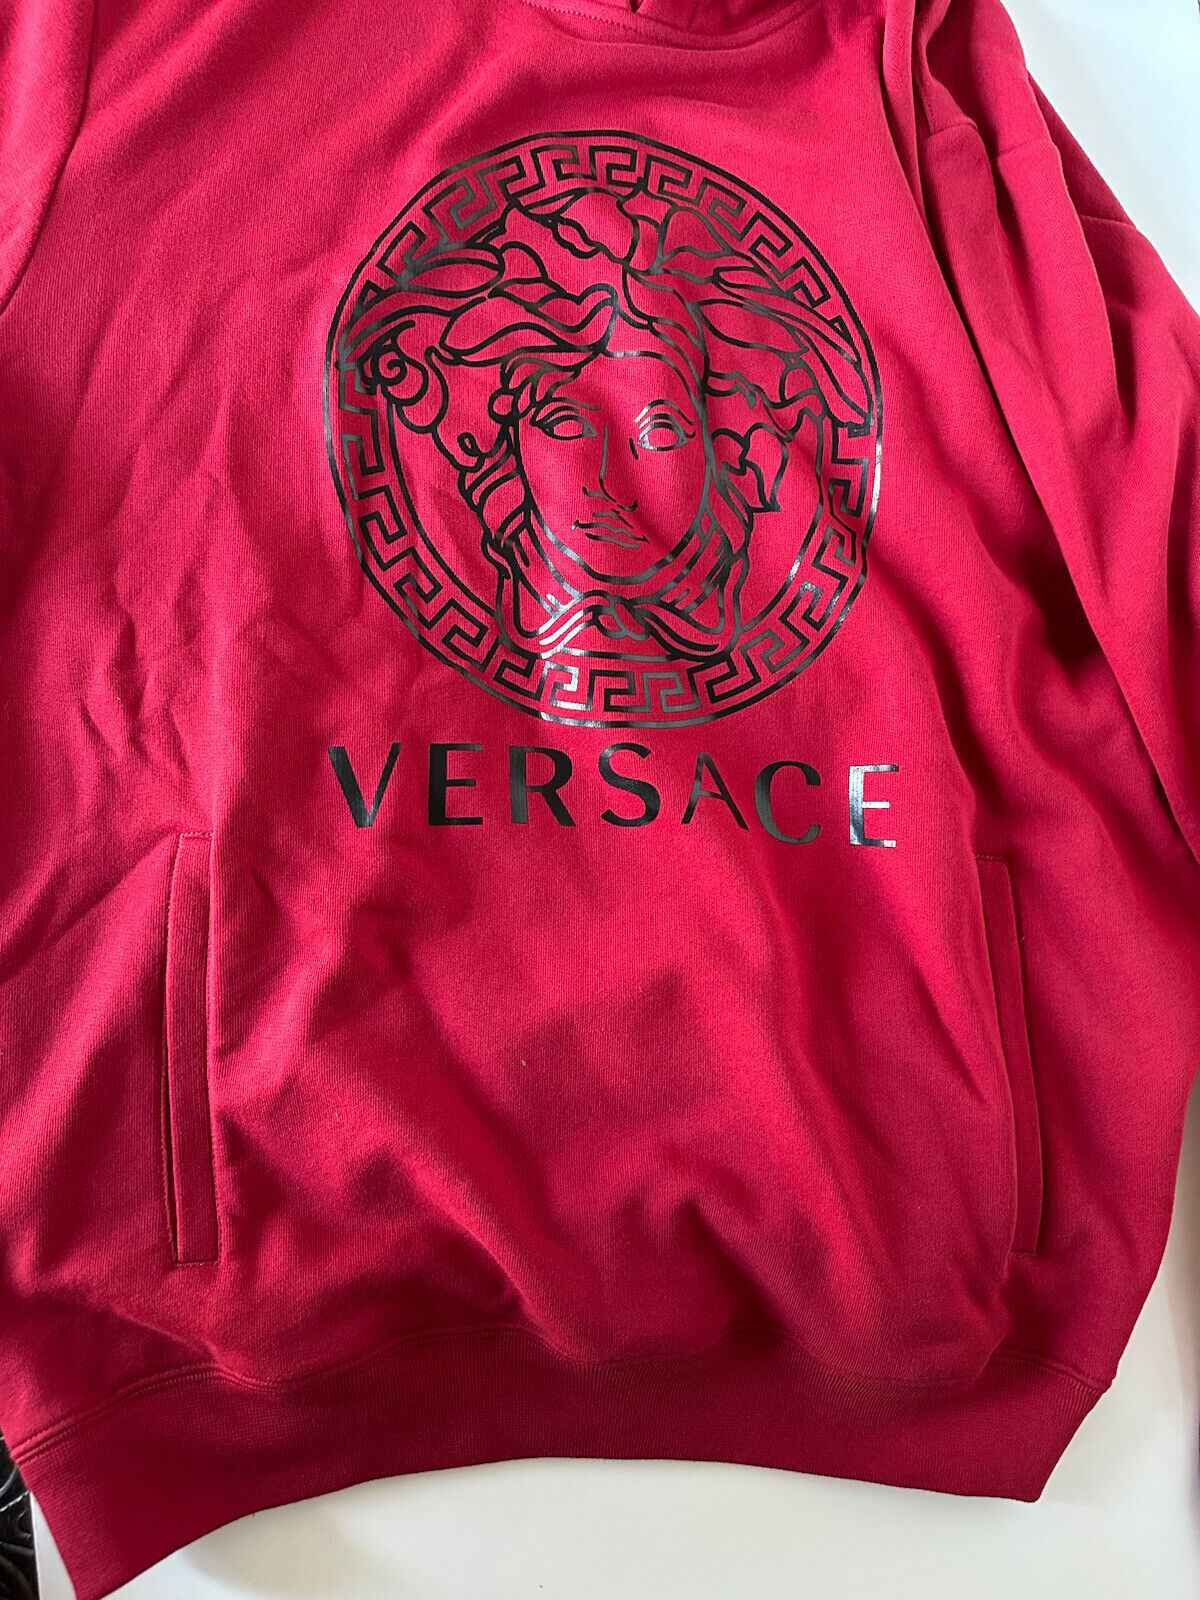 NWT $750 Versace Medusa Print Red Cotton Sweatshirt with Hoodie 5XL A89514S IT